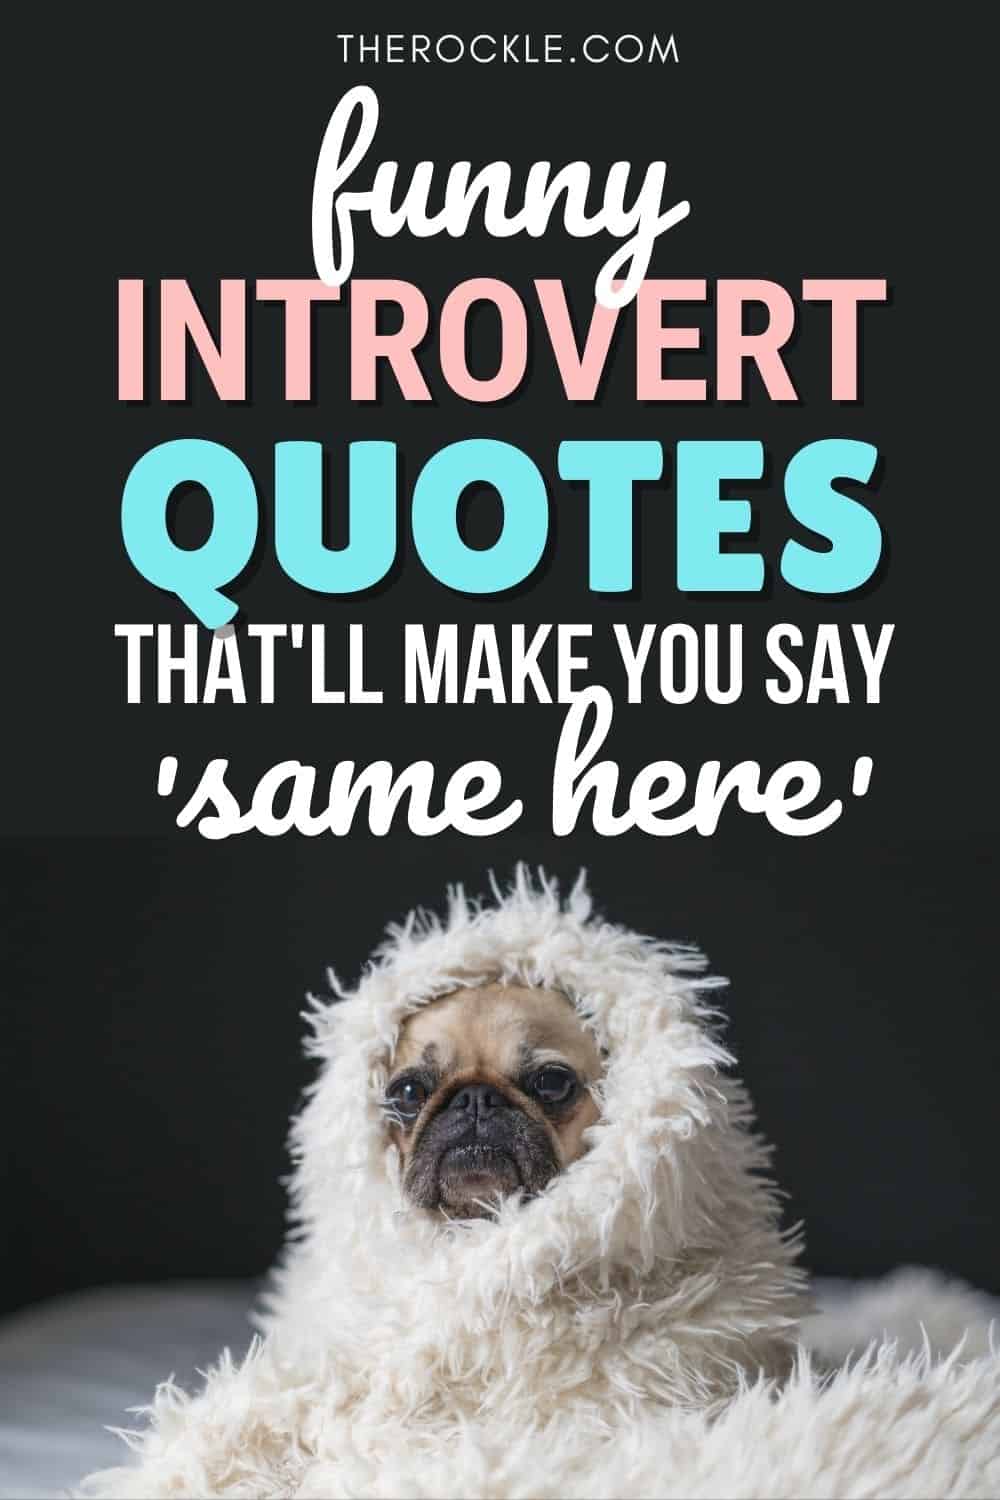 Funny Introvert Quotes That'll Make You Say 'Same Here' | THE ROCKLE